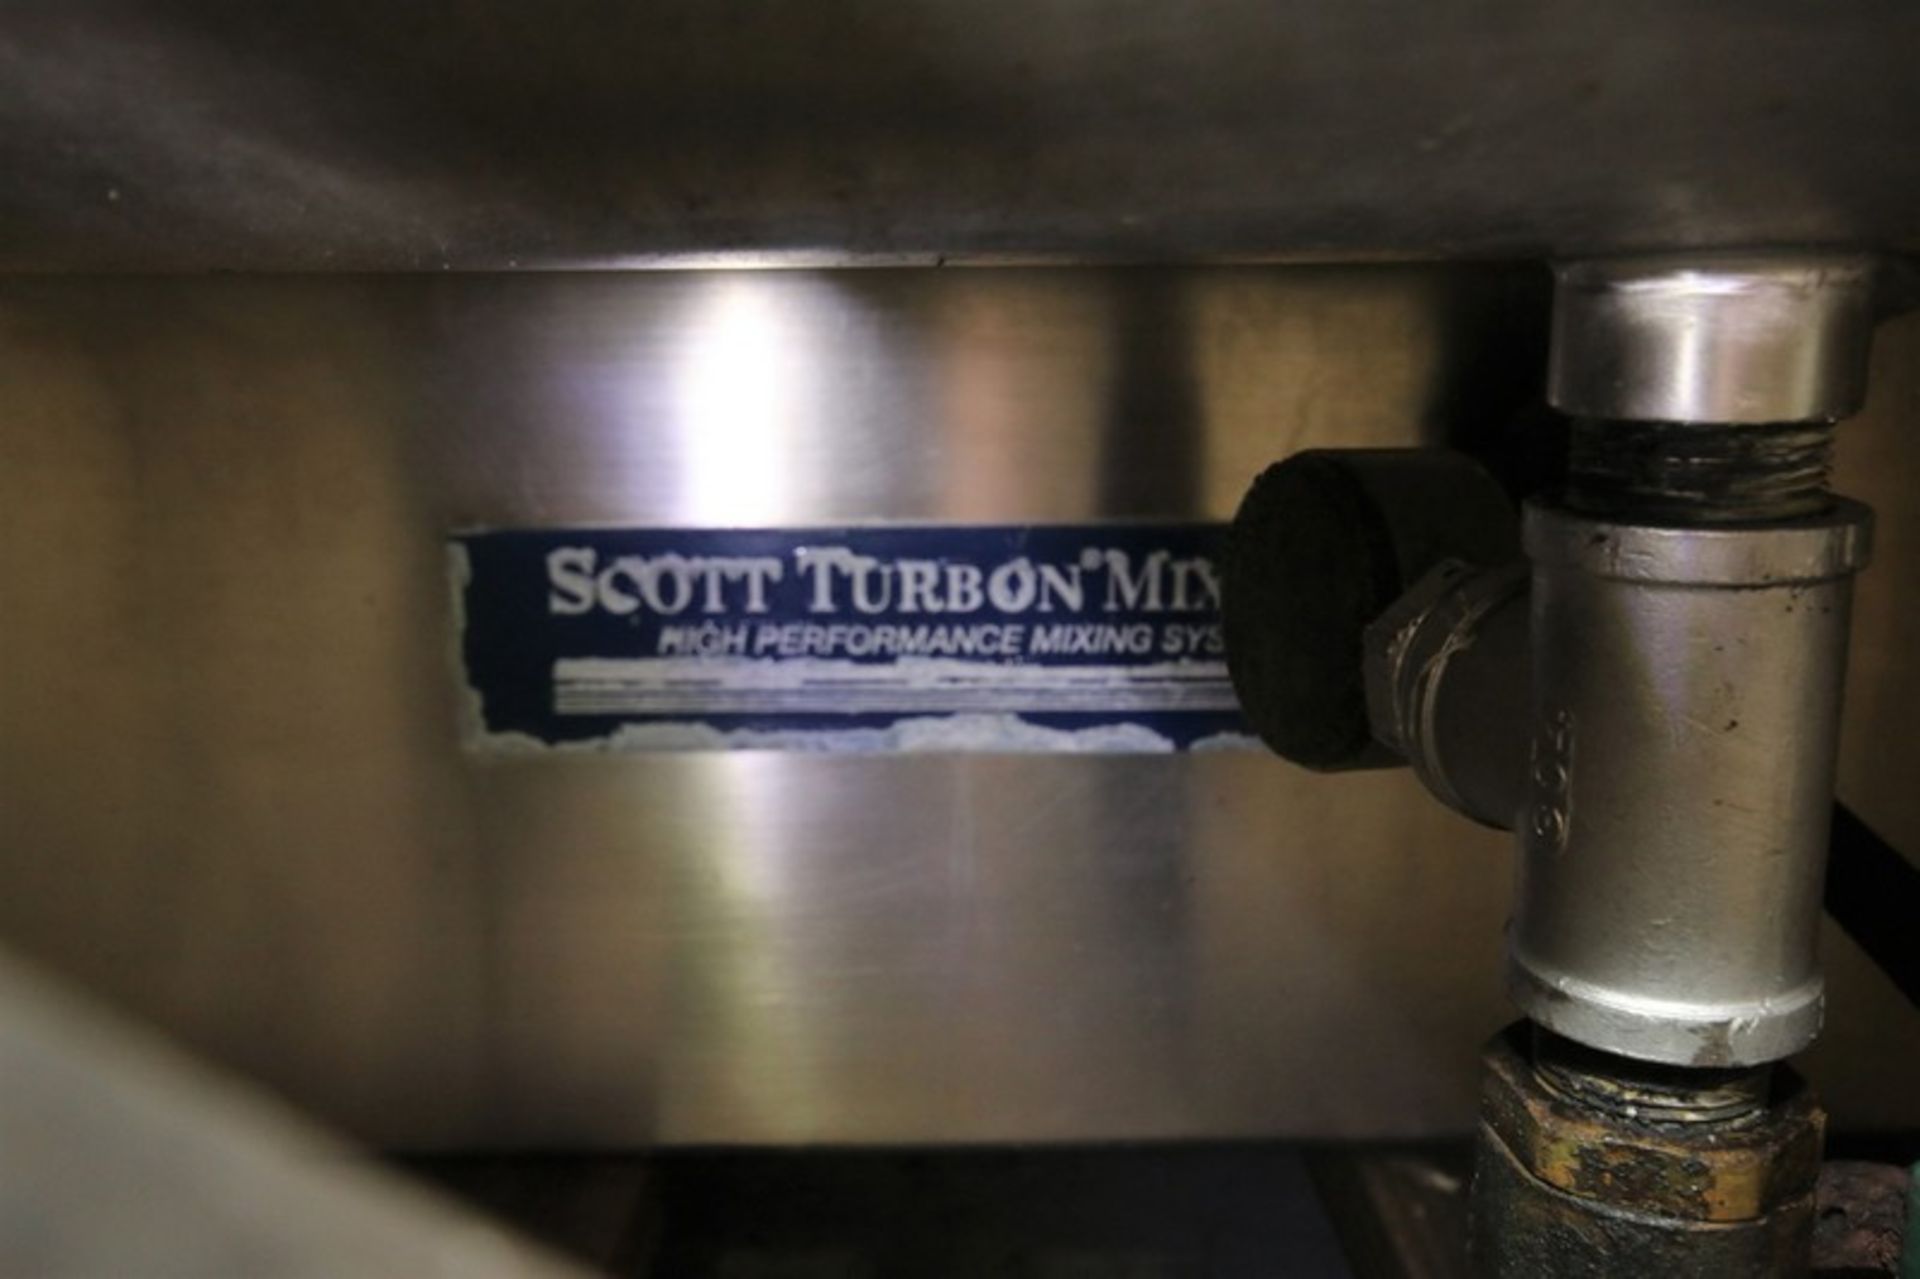 Scott Vertical S/S Turbon Mixer, Aprox. 10 ft H,with 60 hp / 1780 rpm Motor, 460V 3 Phase, with - Image 7 of 7